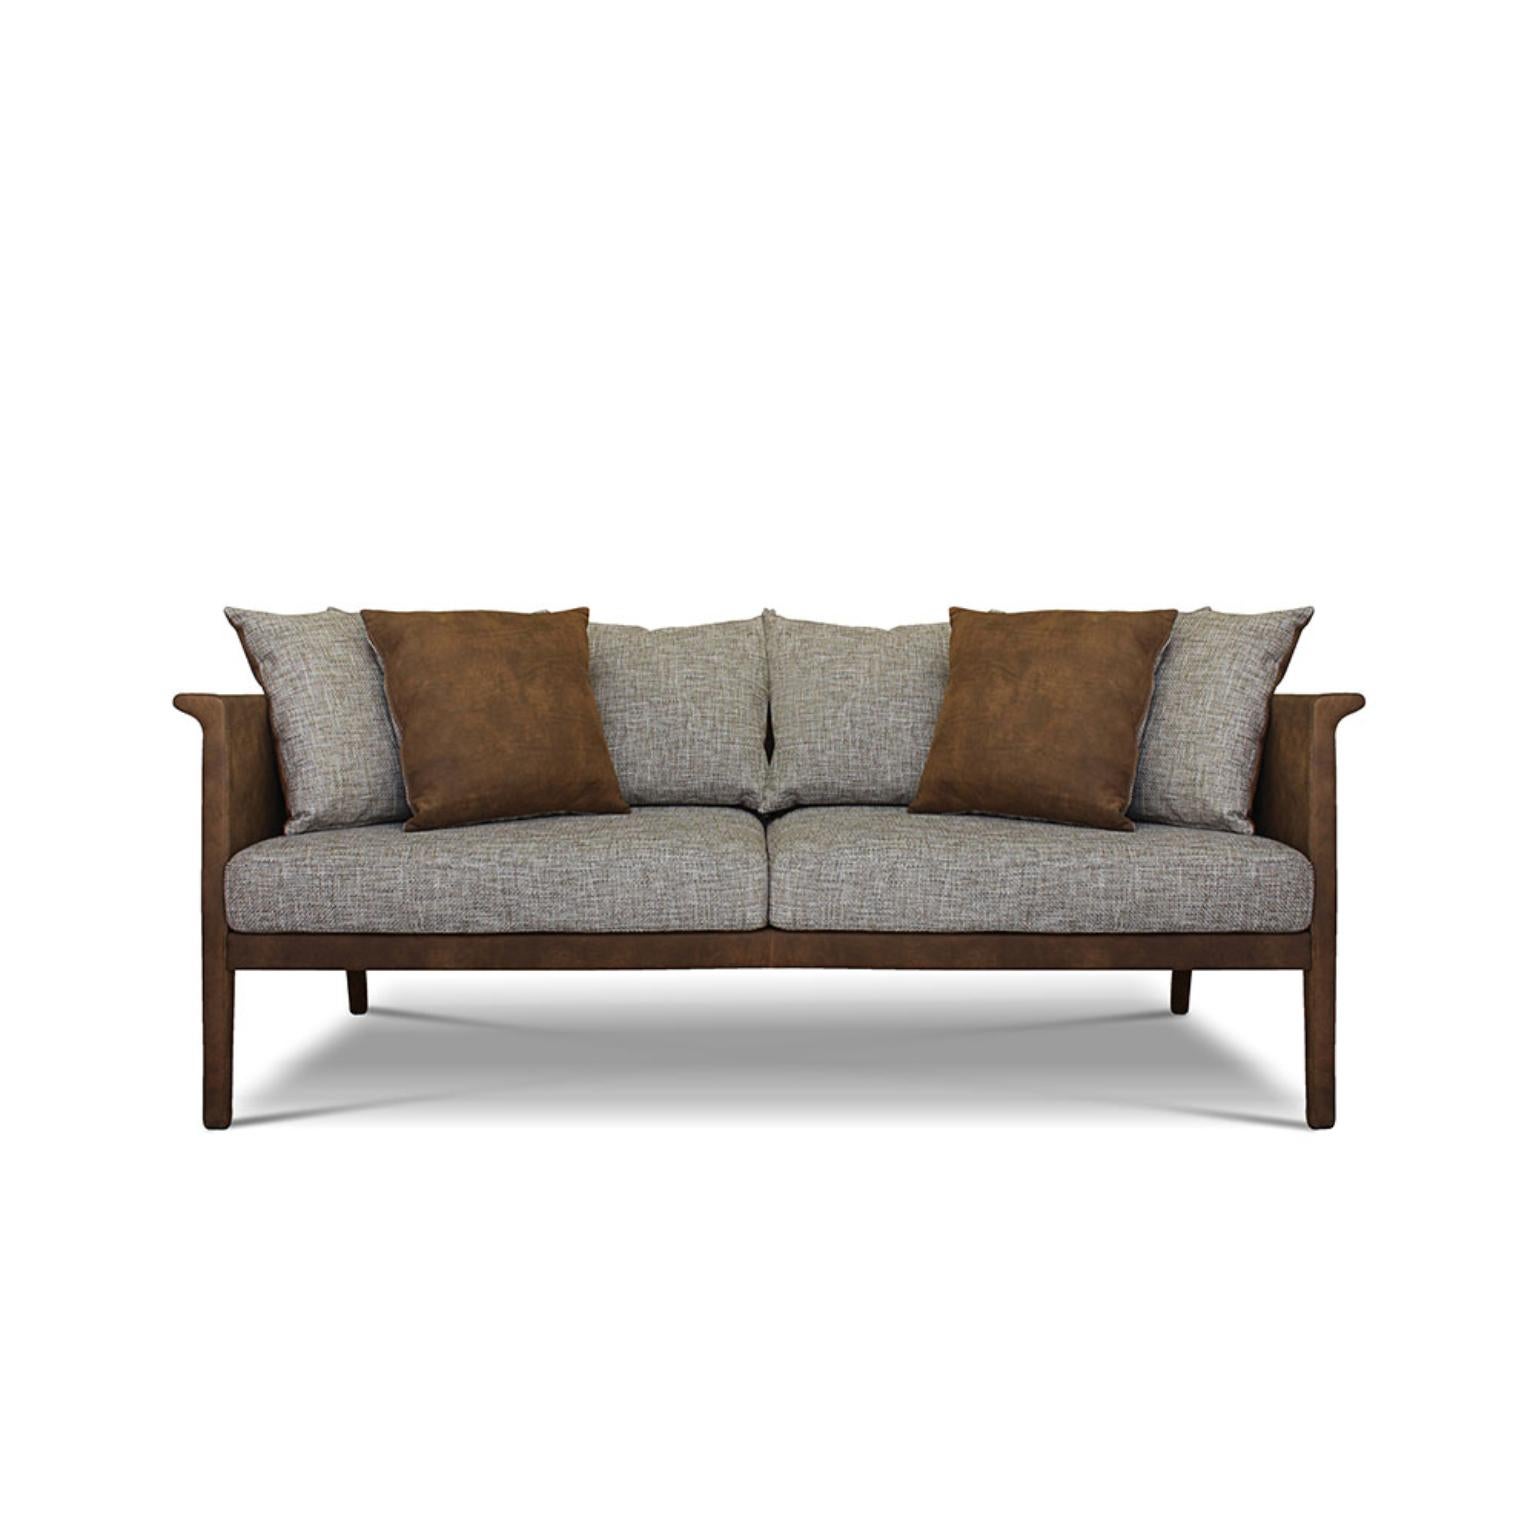 Unique franz sofa by Collector
Dimensions: W 200 x D 85 x H 86 cm
Materials: Fabric, leather.
Other materials available. Depending on the material the price may vary.

The Collector brand aims to be part of the daily life by fusing furniture to our